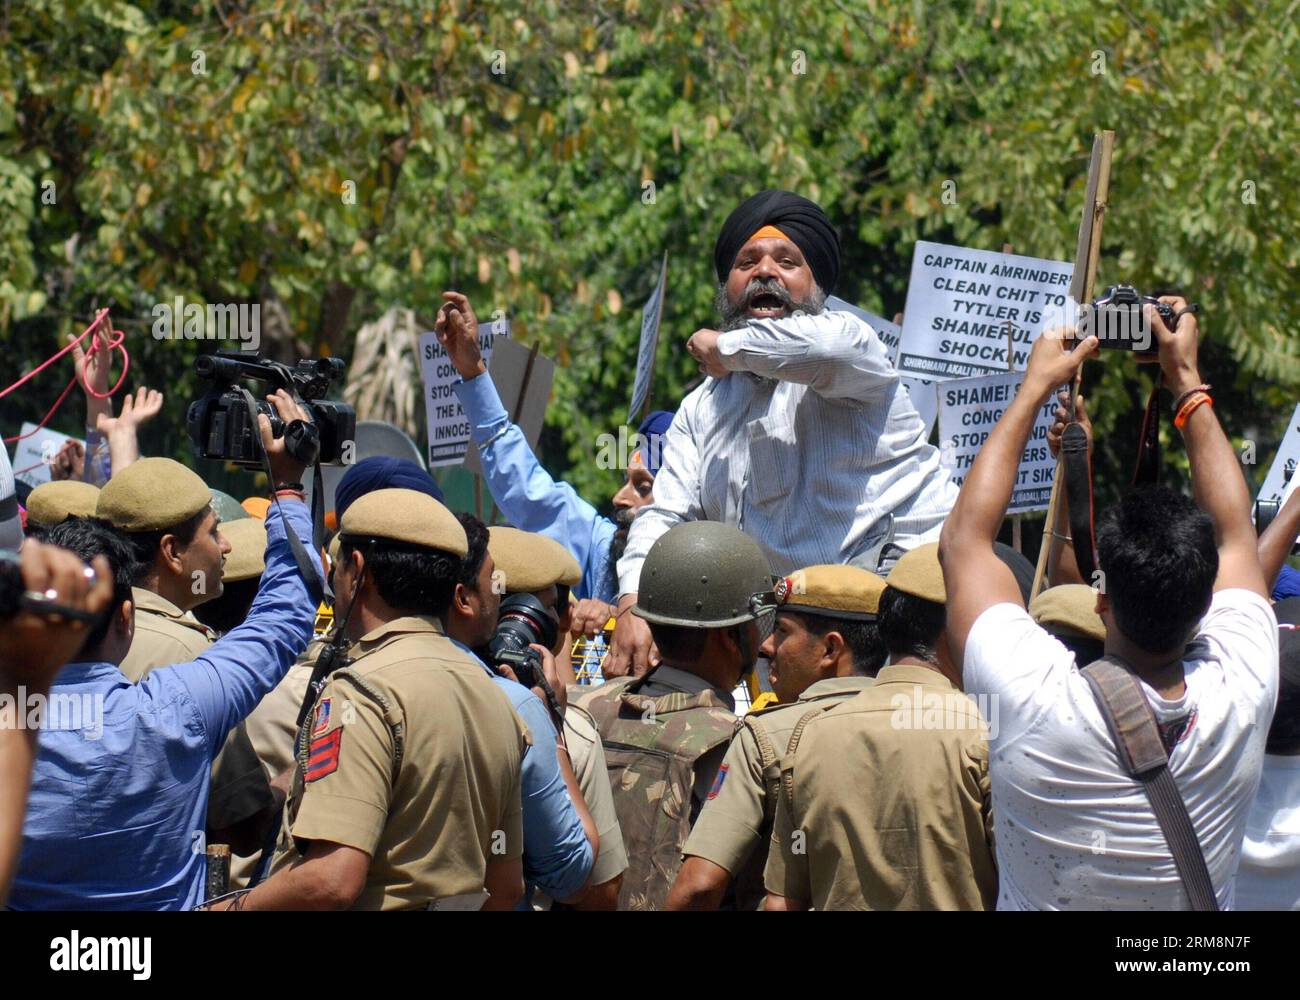 (140421) -- NEW DELHI, April 21, 2014 (Xinhua) -- Indian Sikh protesters shout slogans near a police barricade during a protest against Congress party leader and former chief minister of Punjab state Amarinder Singh for his recent remarks on the country s 1984 anti-Sikh riots in New Delhi, India, April 21, 2014. Singh in a recent television interview said party leader Jagdish Tytler, one of the accused, had no role in the 1984 riots that killed more than 3,000 Sikhs. Top Congress party leaders have been accused of inciting mobs during the violence that followed the assassination of Prime Minis Stock Photo